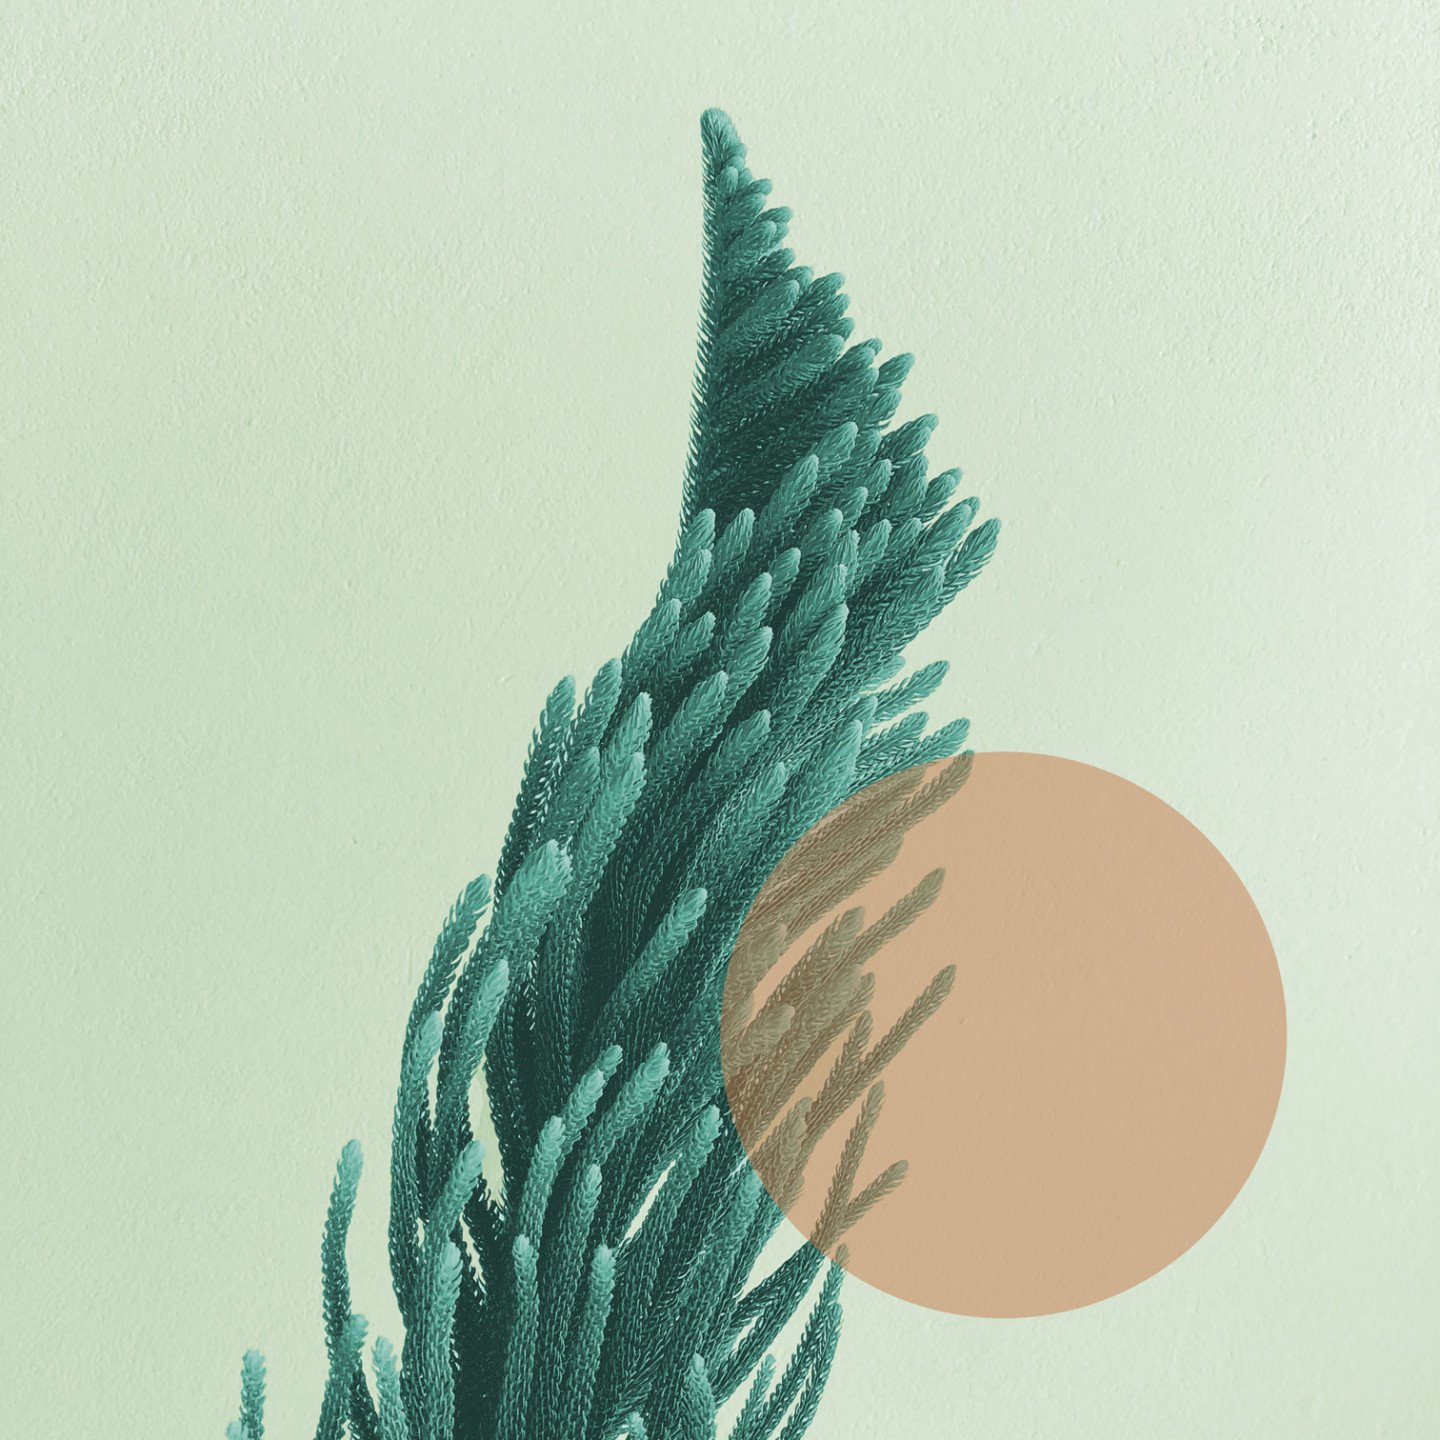 An image with a fern-like plant looking like it is swaying in the wind